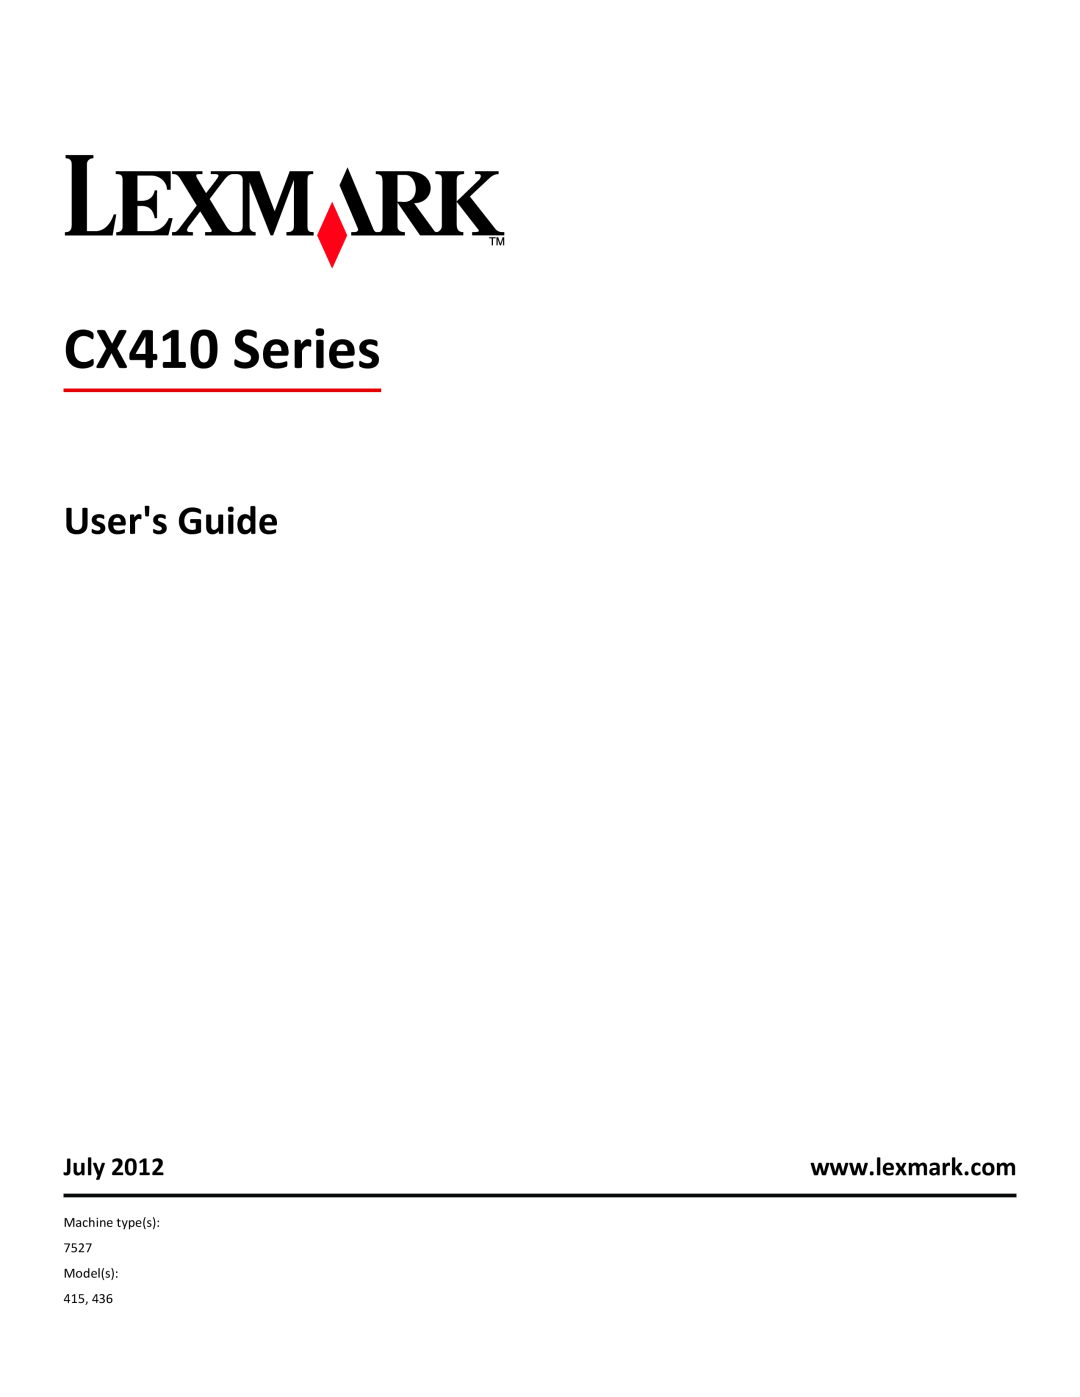 Lexmark 436 manual Users Guide, July, CX410 Series, Machine types 7527 Models 415 